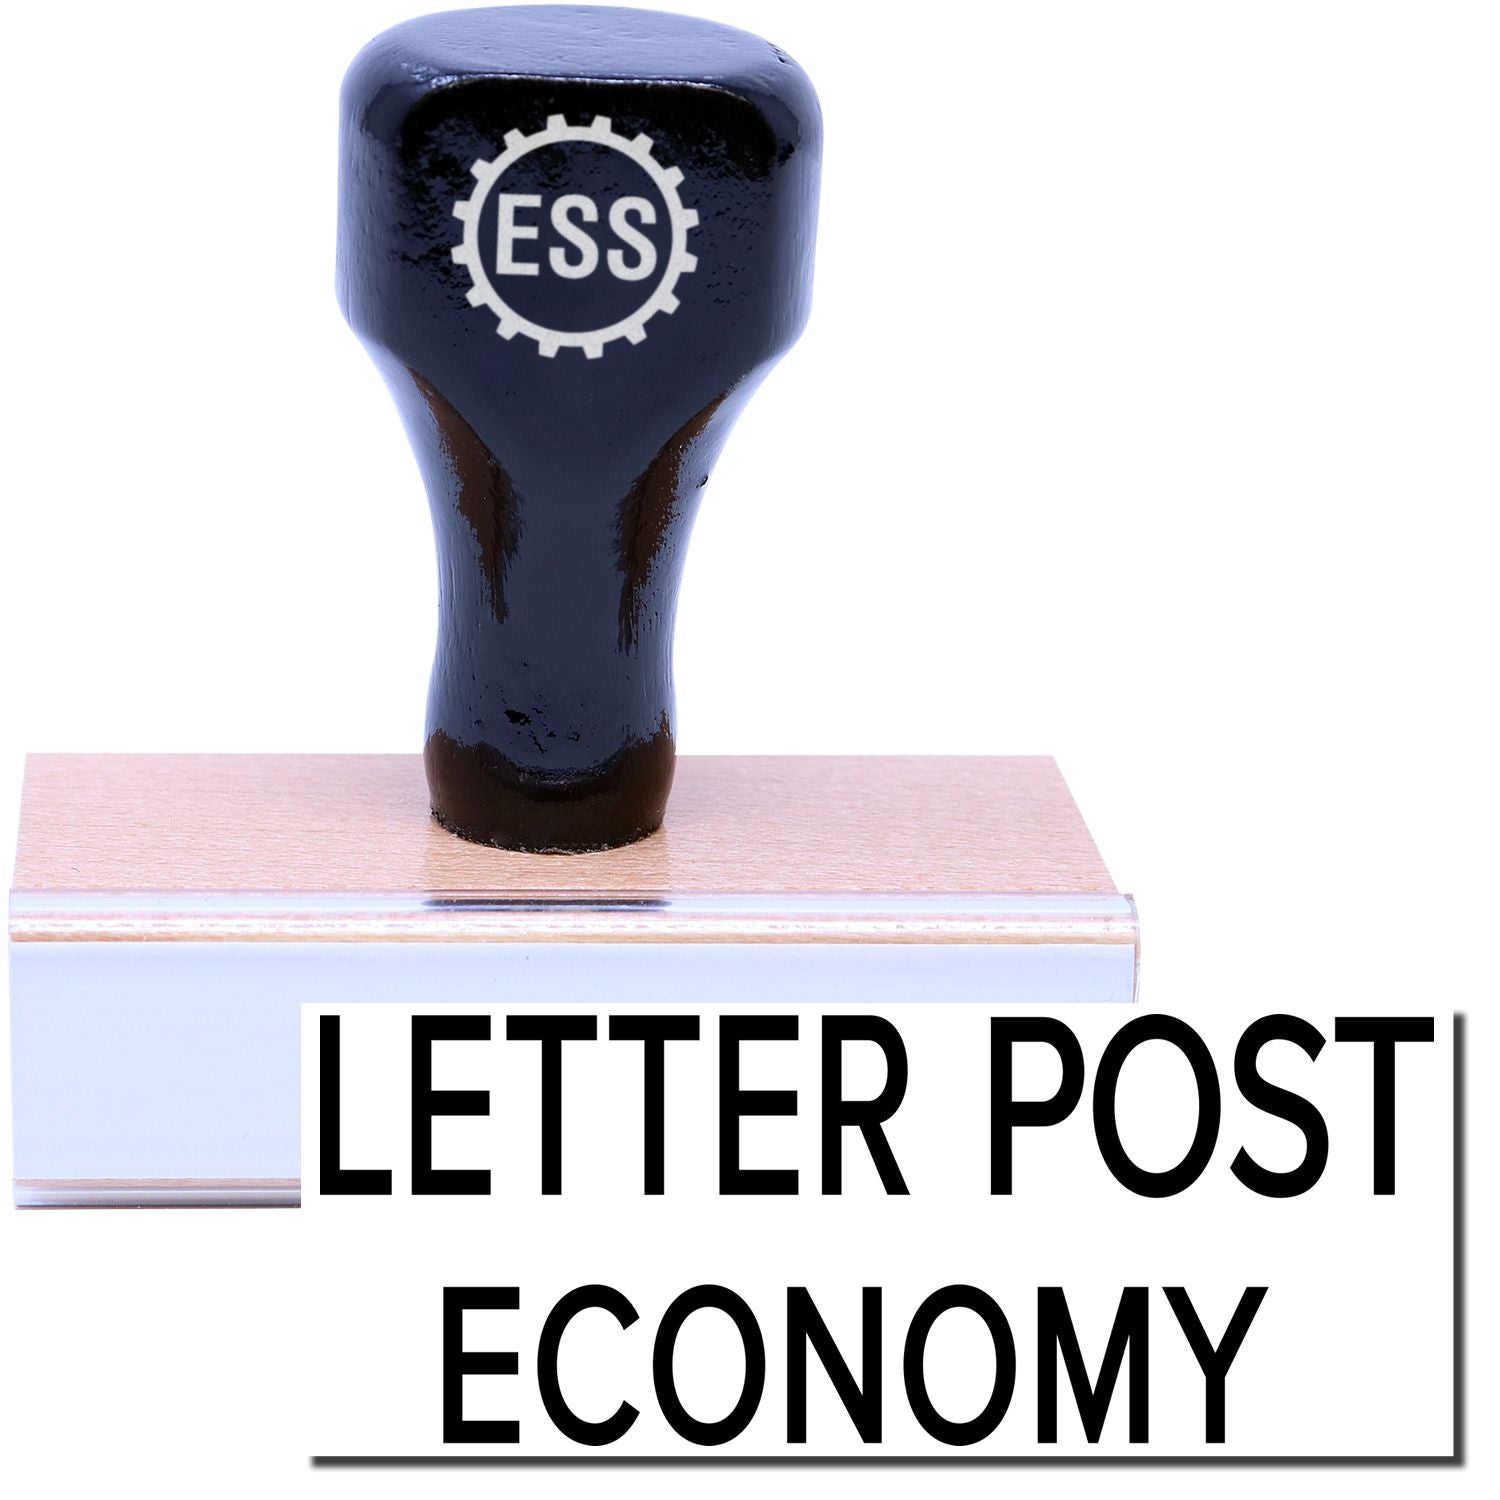 A stock office rubber stamp with a stamped image showing how the text "LETTER POST ECONOMY" in a large font is displayed after stamping.